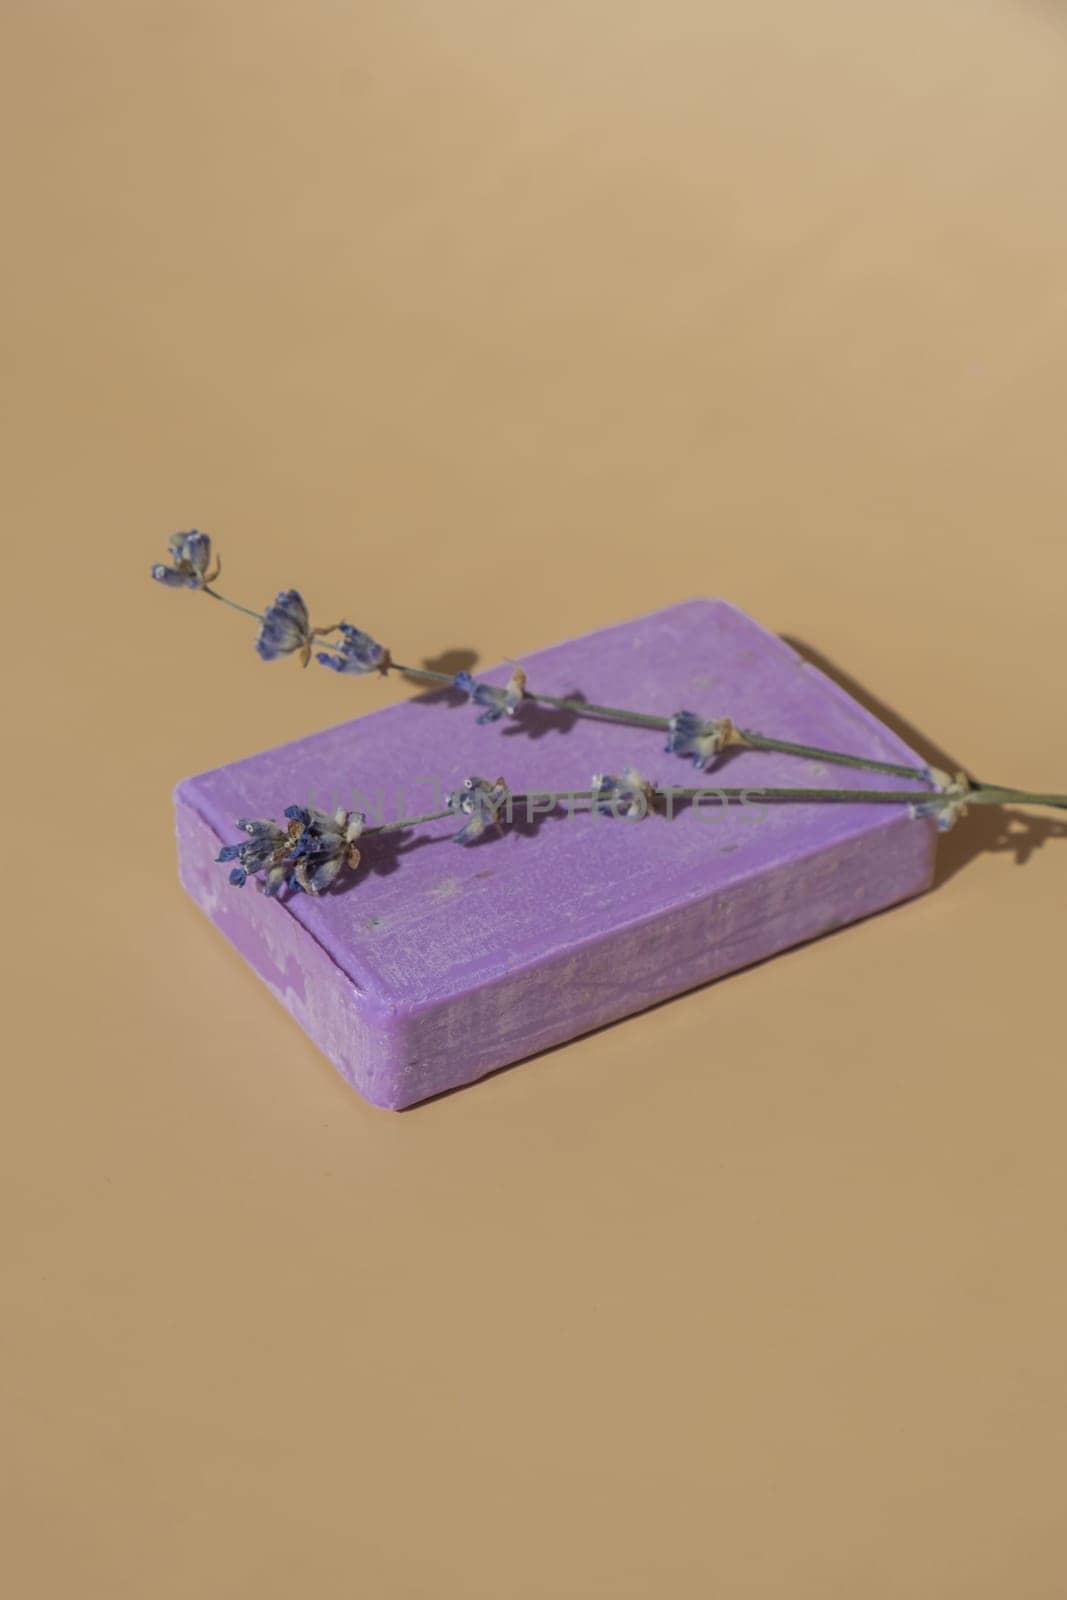 Handmade aromatic spa lavender soap. Natural additives and extracts. Bar of lavender soap with dried flowers. Beauty treatment product herbal ecological organic cosmetics. Copy space